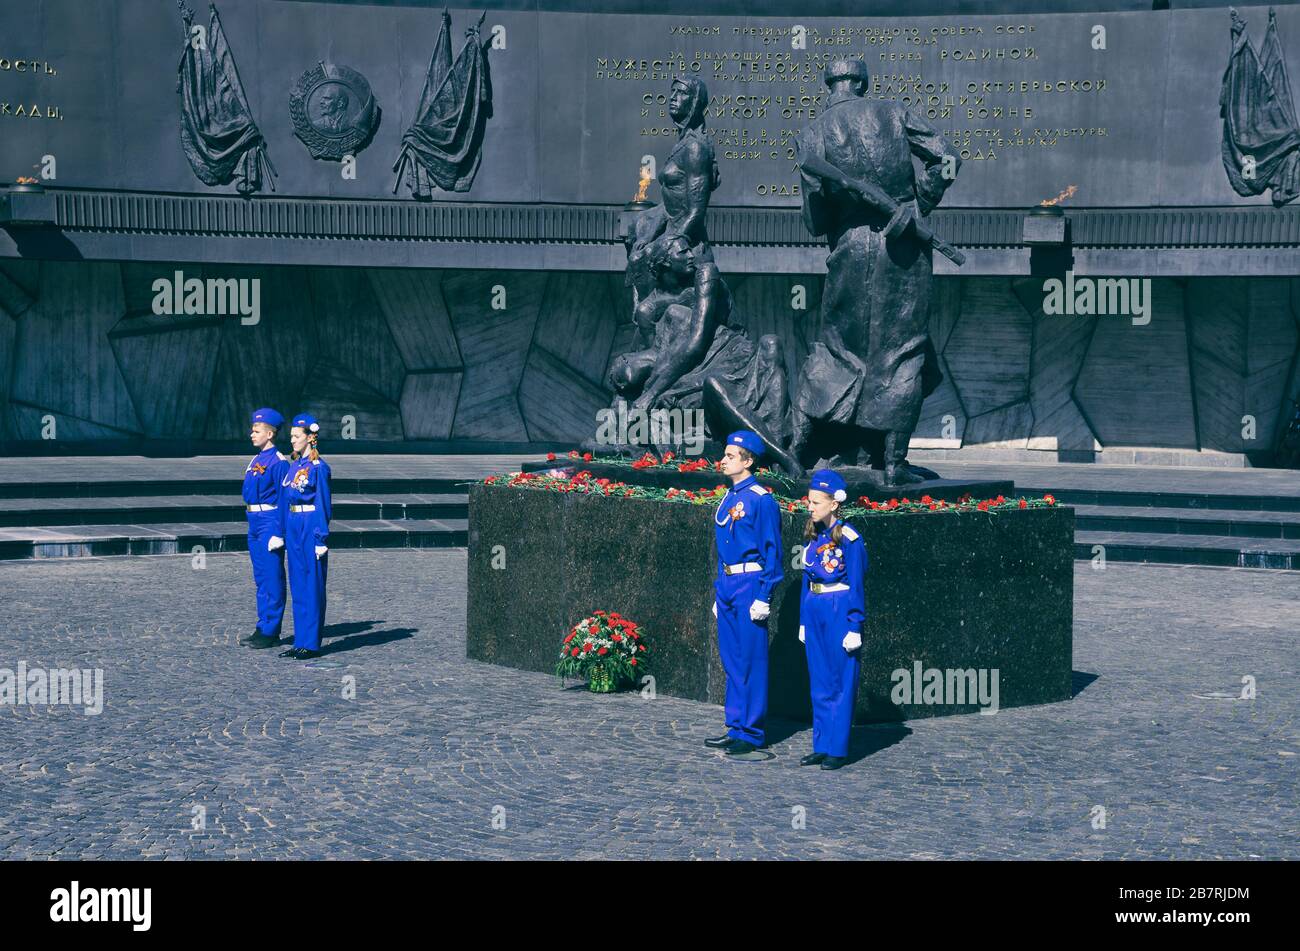 Saint Petersburg, Russia - May 05, 2016: Four cadets at attention at the memorial 'Monument to the heroic defenders of Leningrad 1941-1944' on the eve Stock Photo